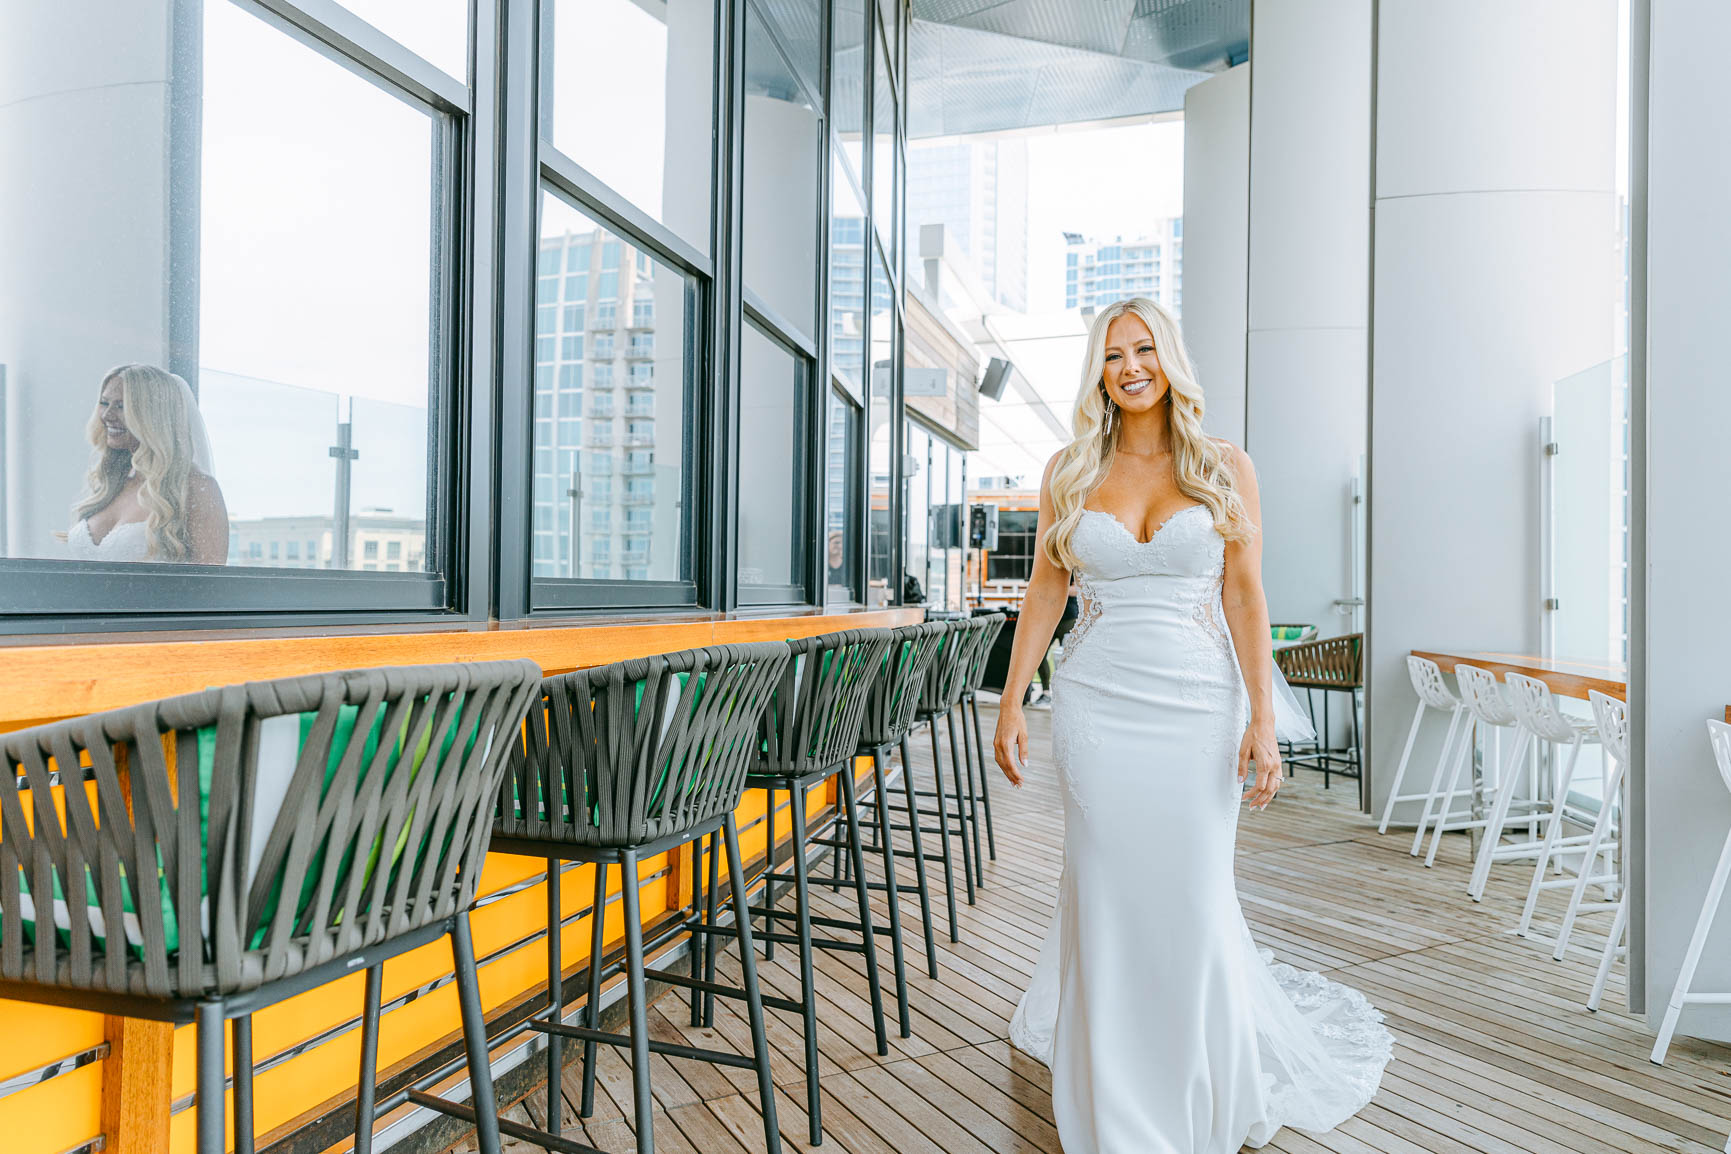 Bride and groom first look at merchant & trade rooftop in Charlotte nc shot by Nhieu Tang Photography | nhieutang.com